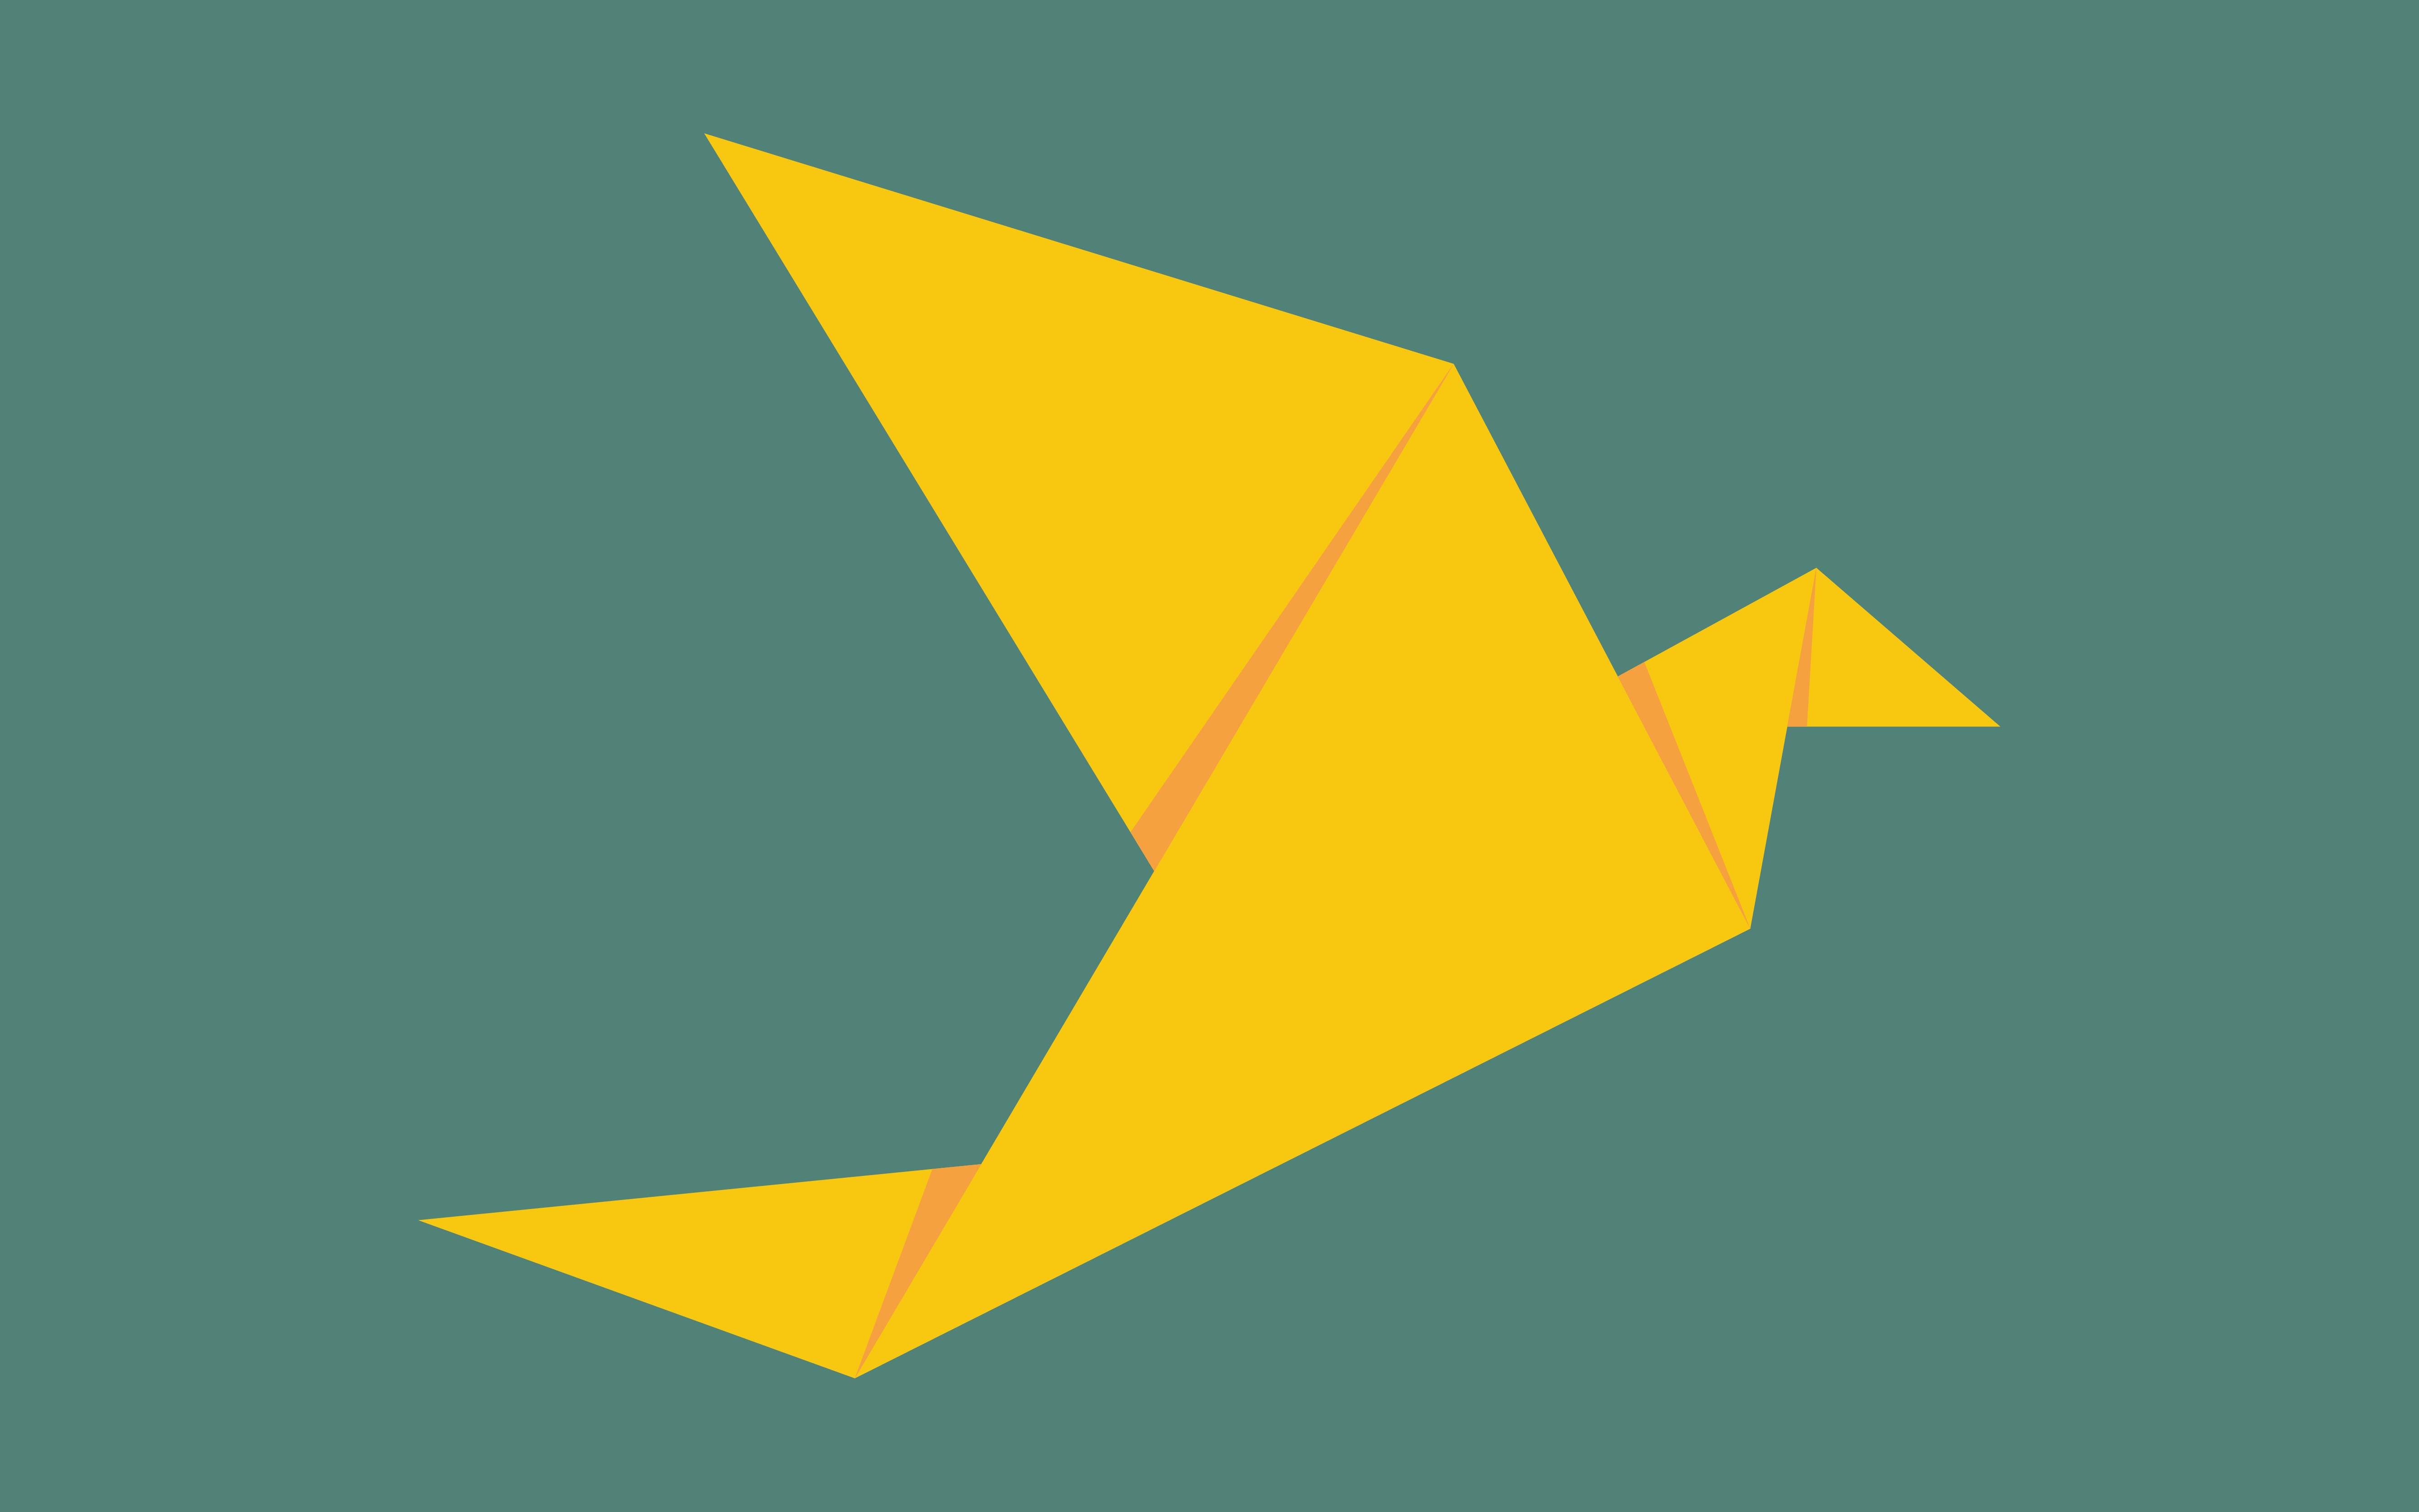 Illustration of a yellow origami bird in front of a turquoise background